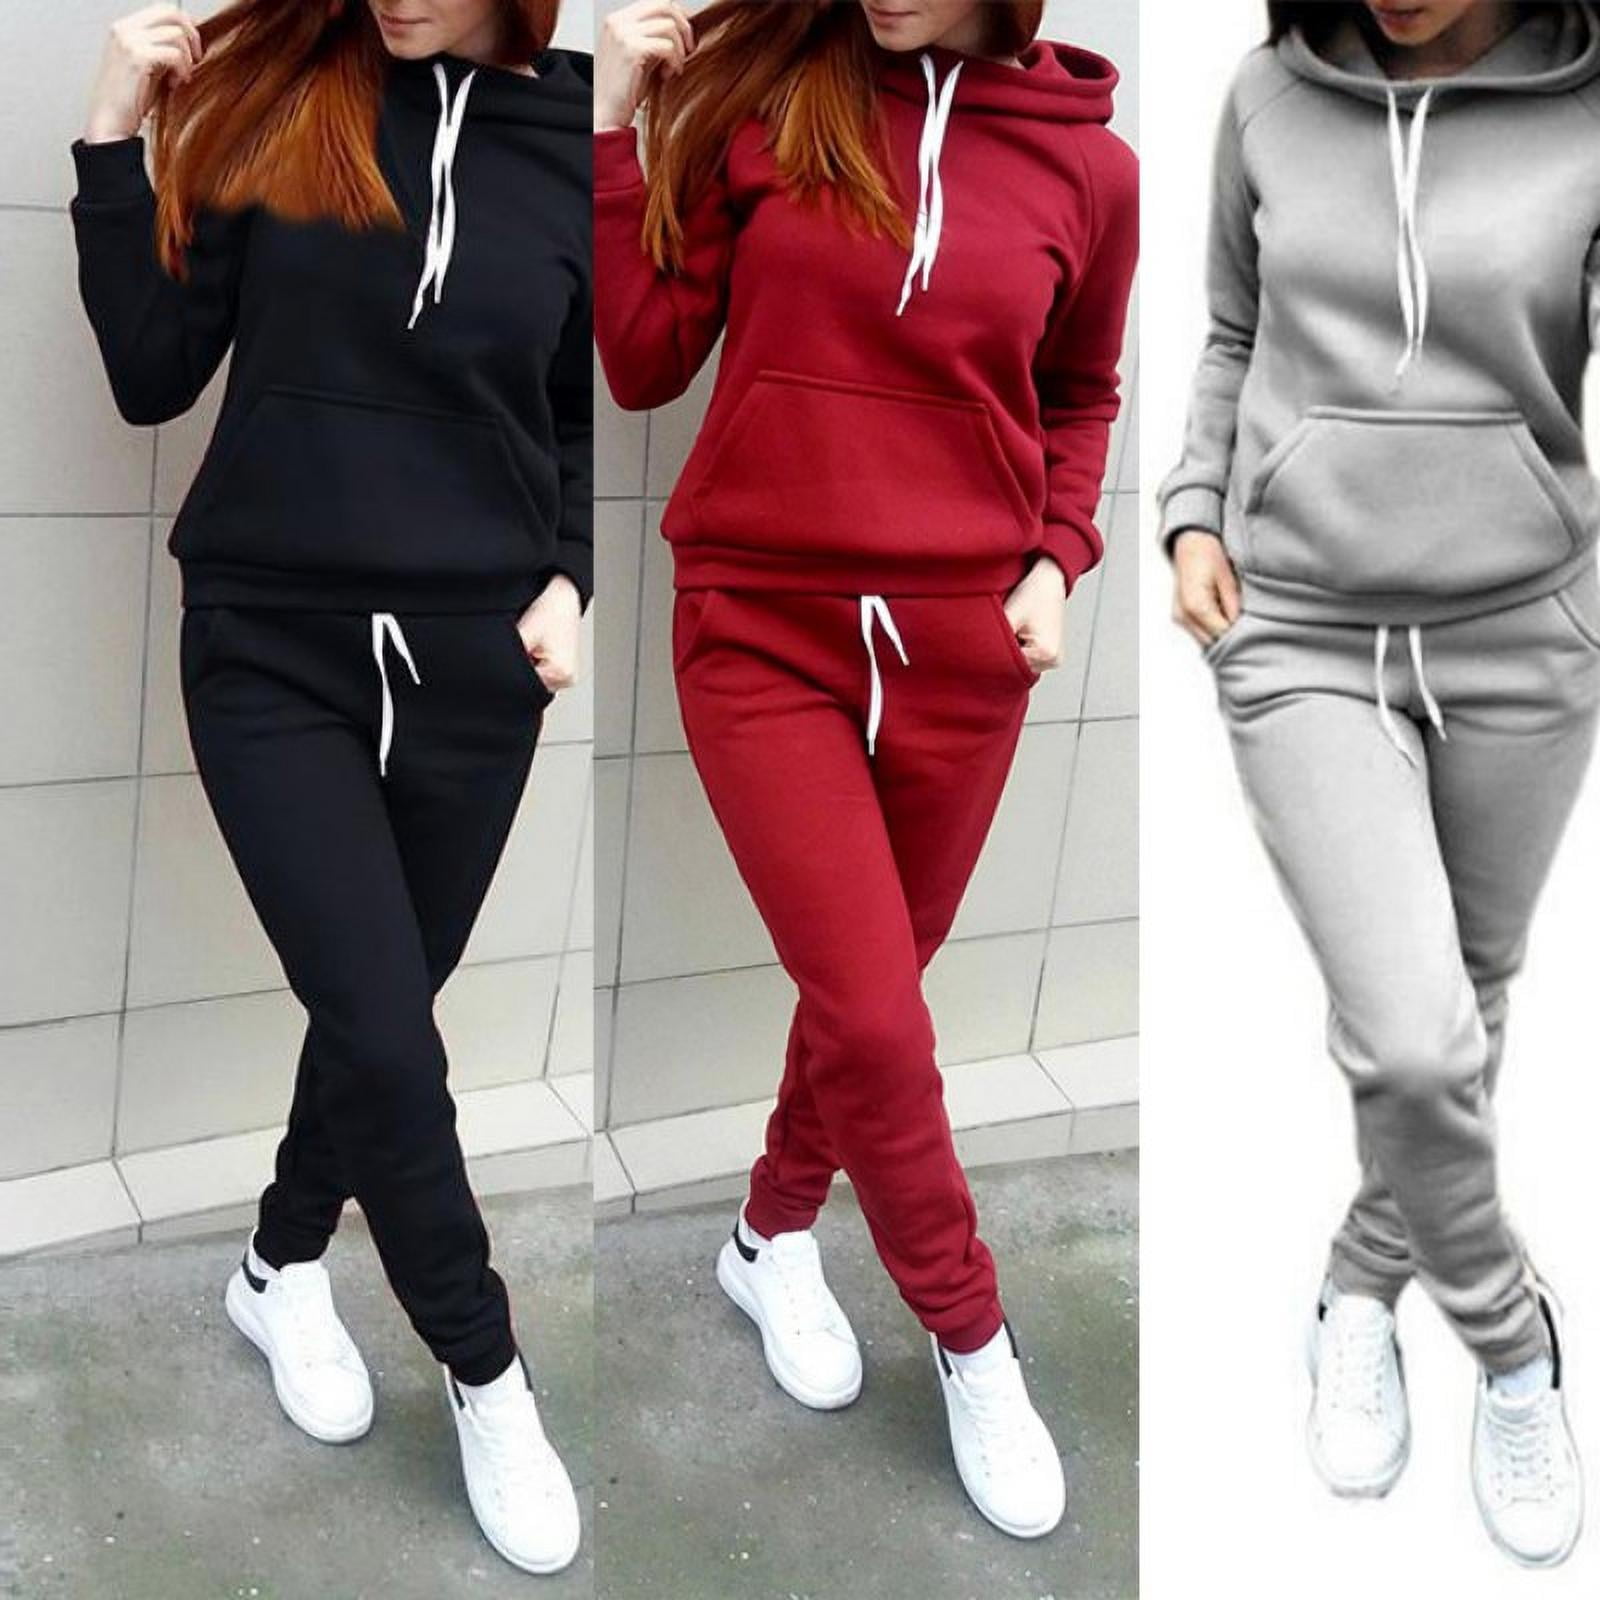 KUBAO Women 2 Pieces Outfit Solid Color Sweatsuit Short Sleeve Long Sleeve Hoodie Long Pants Tracksuit 